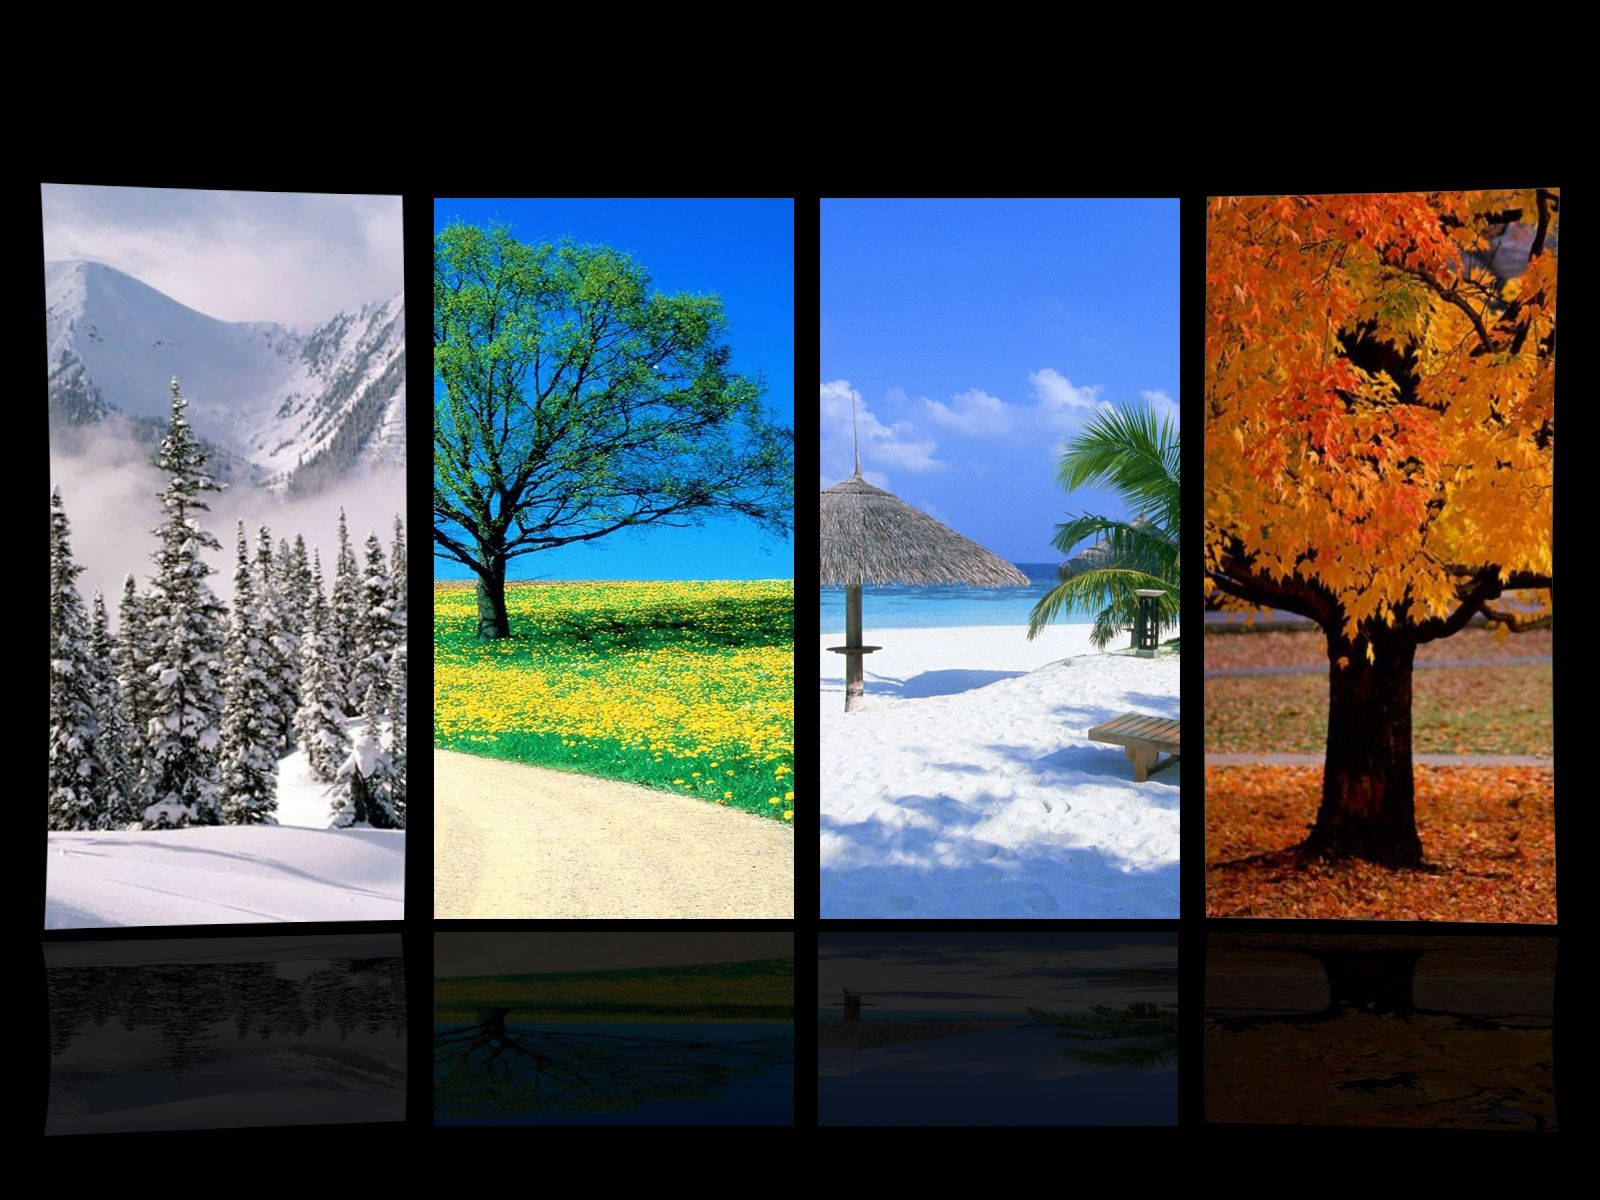 Places During Seasons Wallpaper